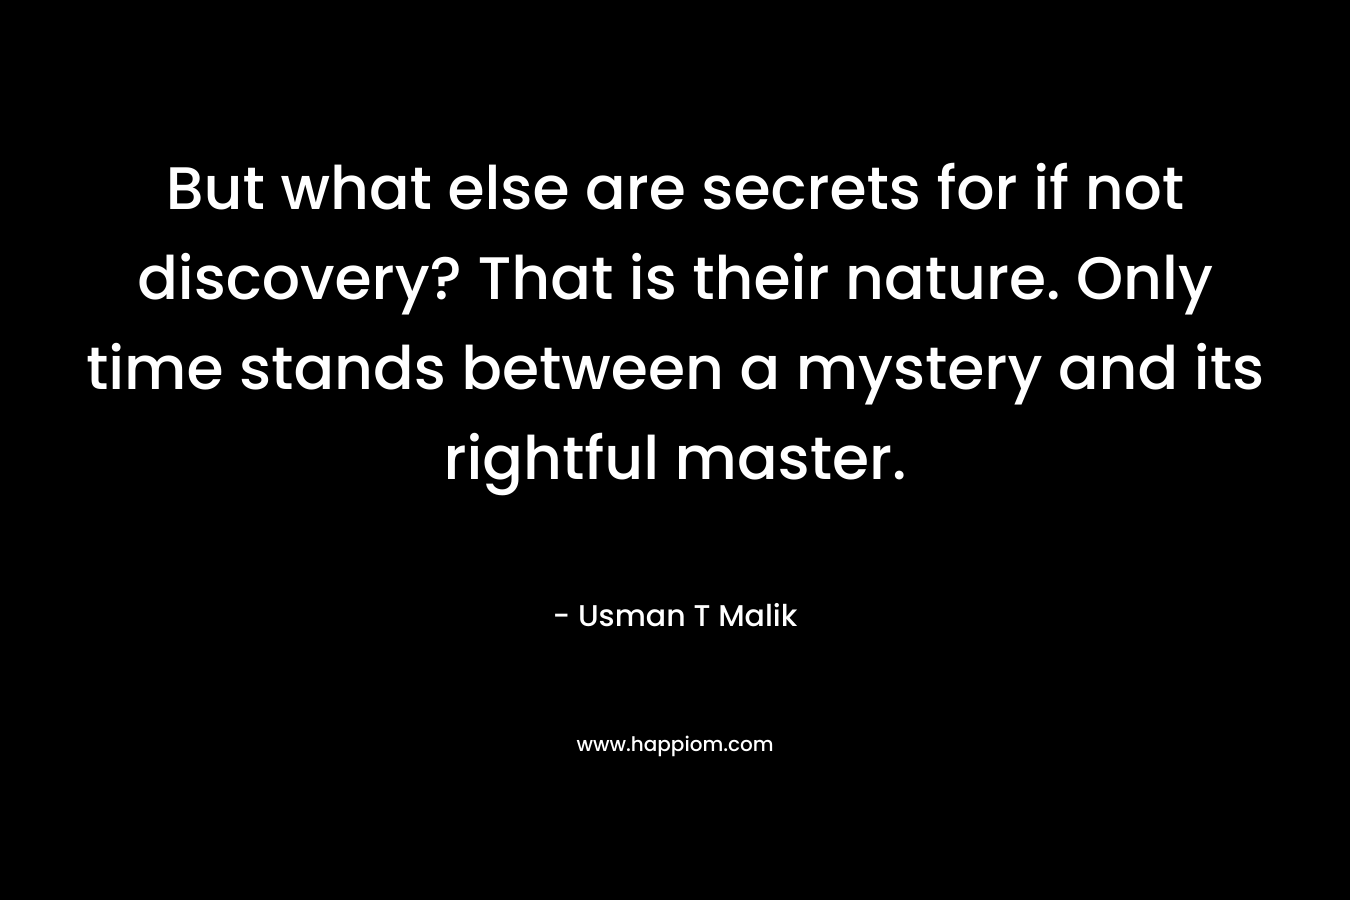 But what else are secrets for if not discovery? That is their nature. Only time stands between a mystery and its rightful master. – Usman T Malik